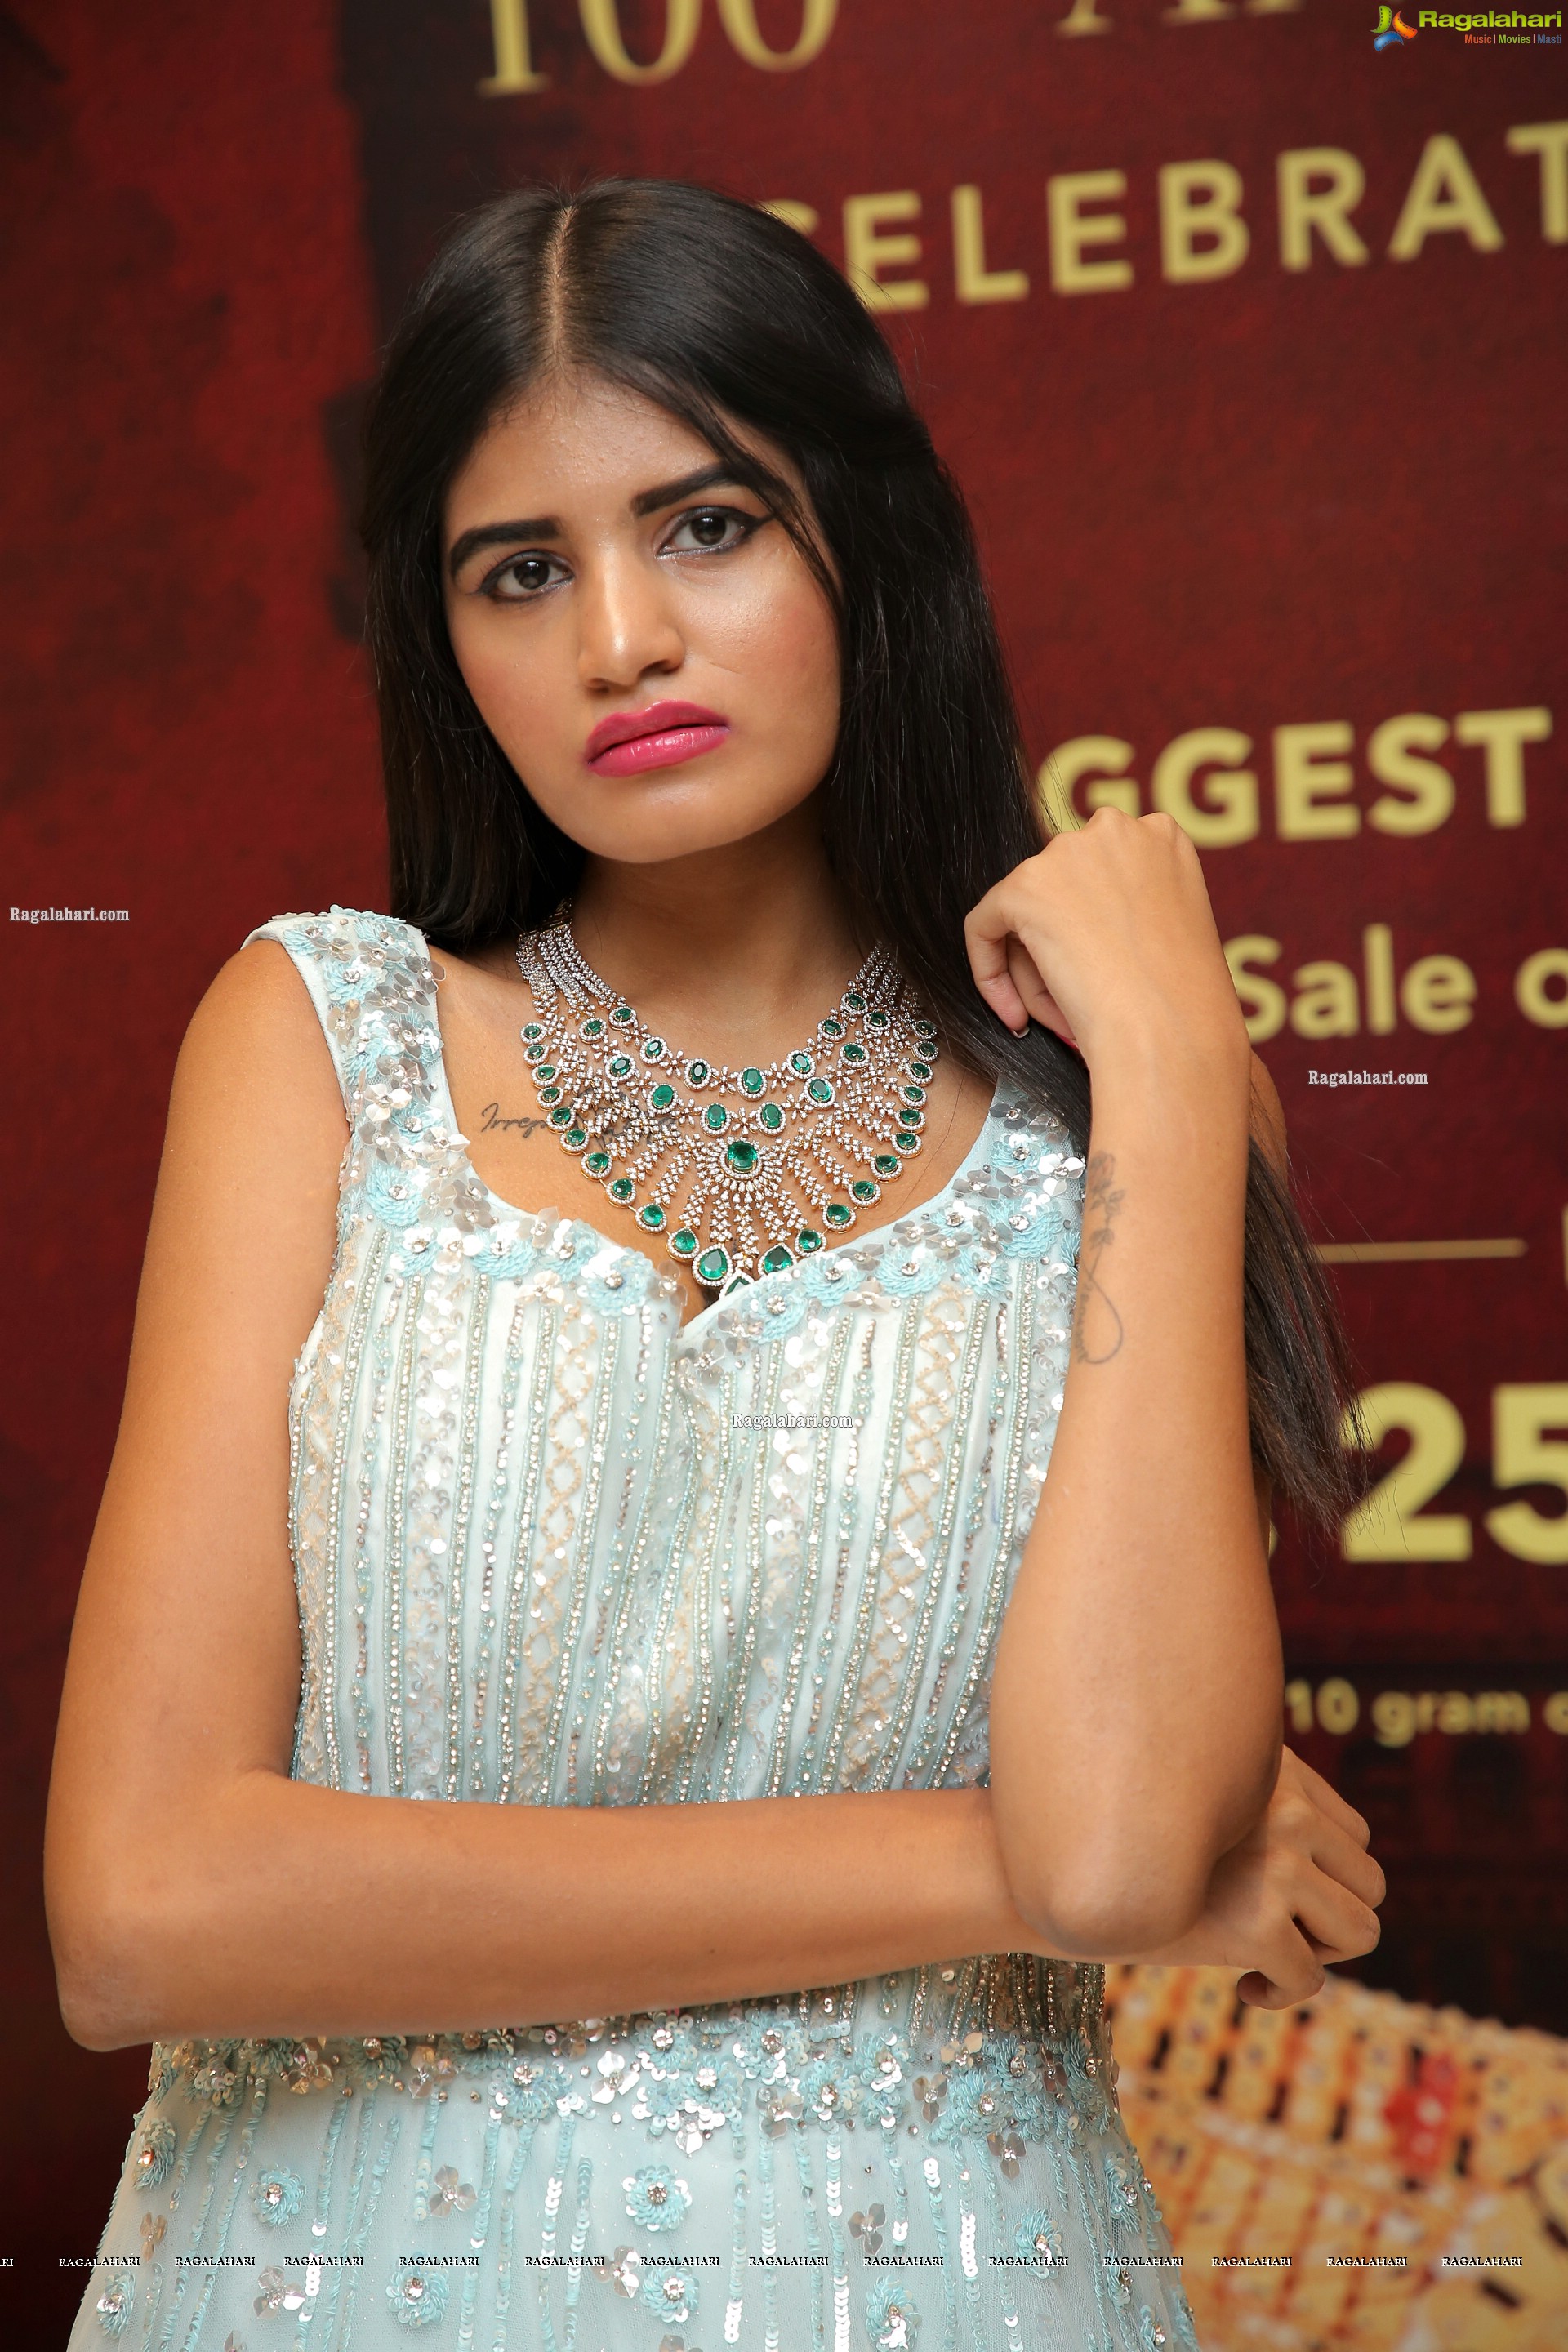 Sindhu Manthri Showcases a Collection of Tibarumal Jewellers' Bridal Jewellery, HD Photo Gallery